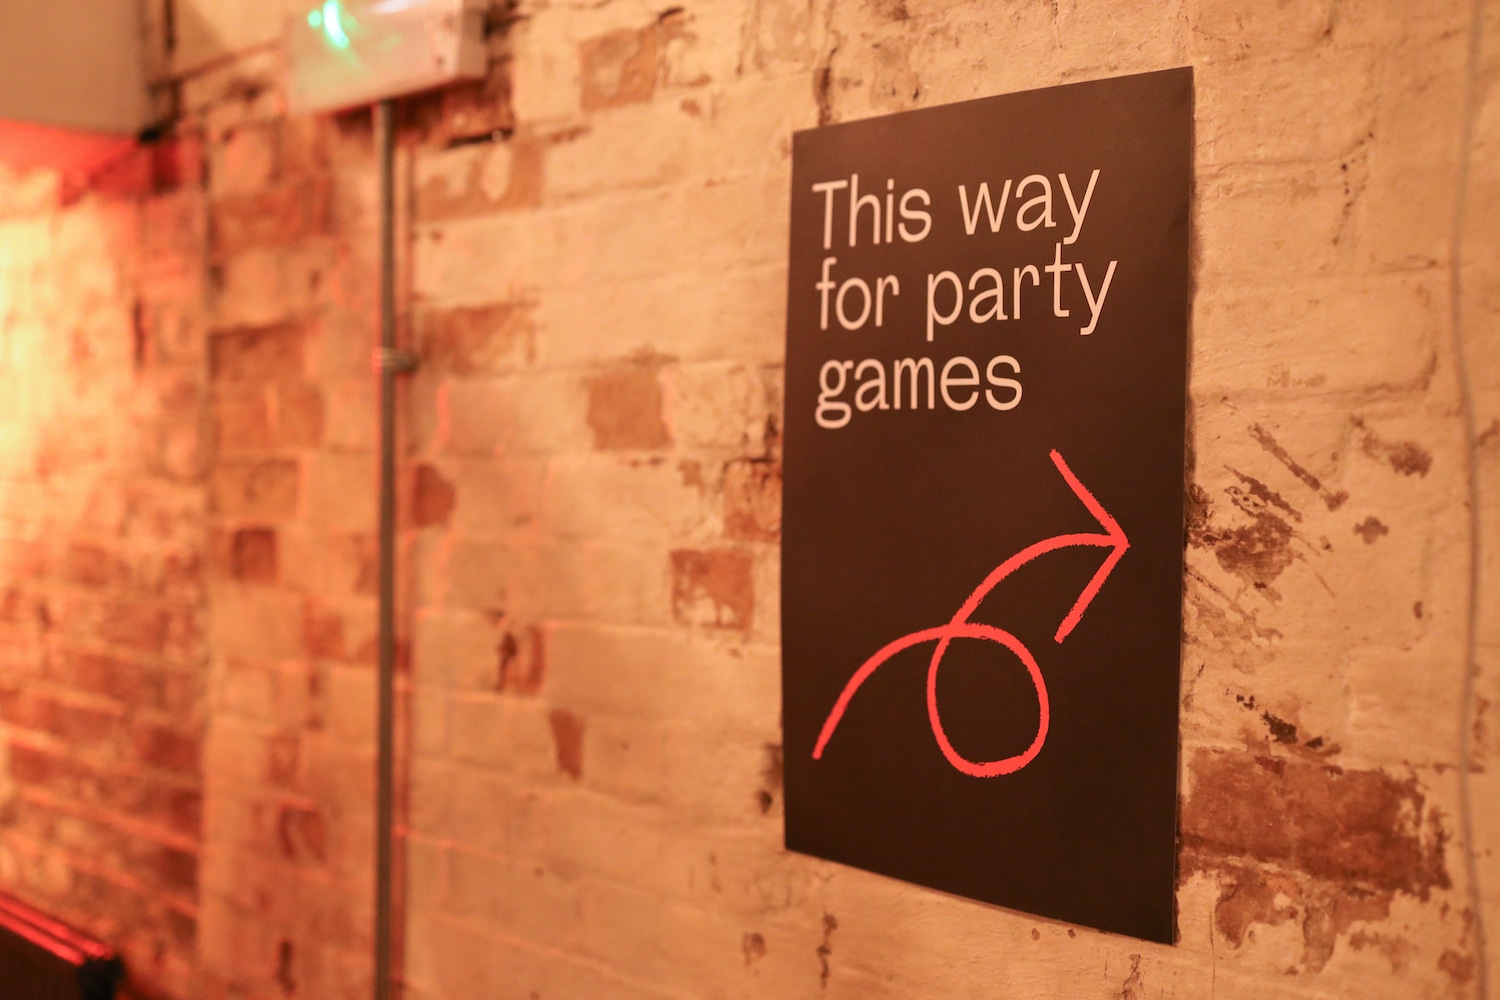 This way for party games poster